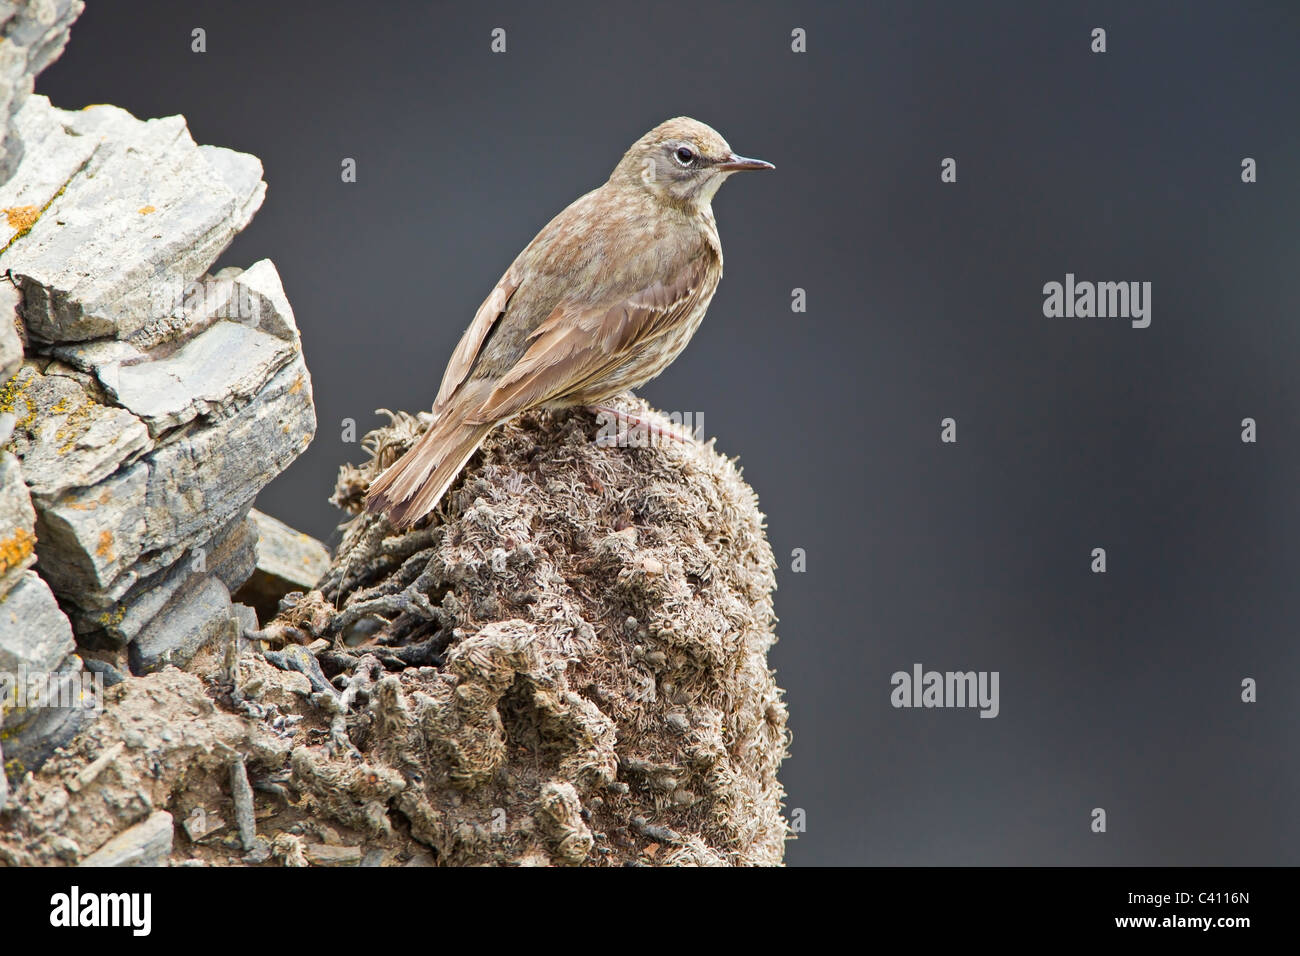 Rock Pipit perched on a cliff outcrop. Stock Photo